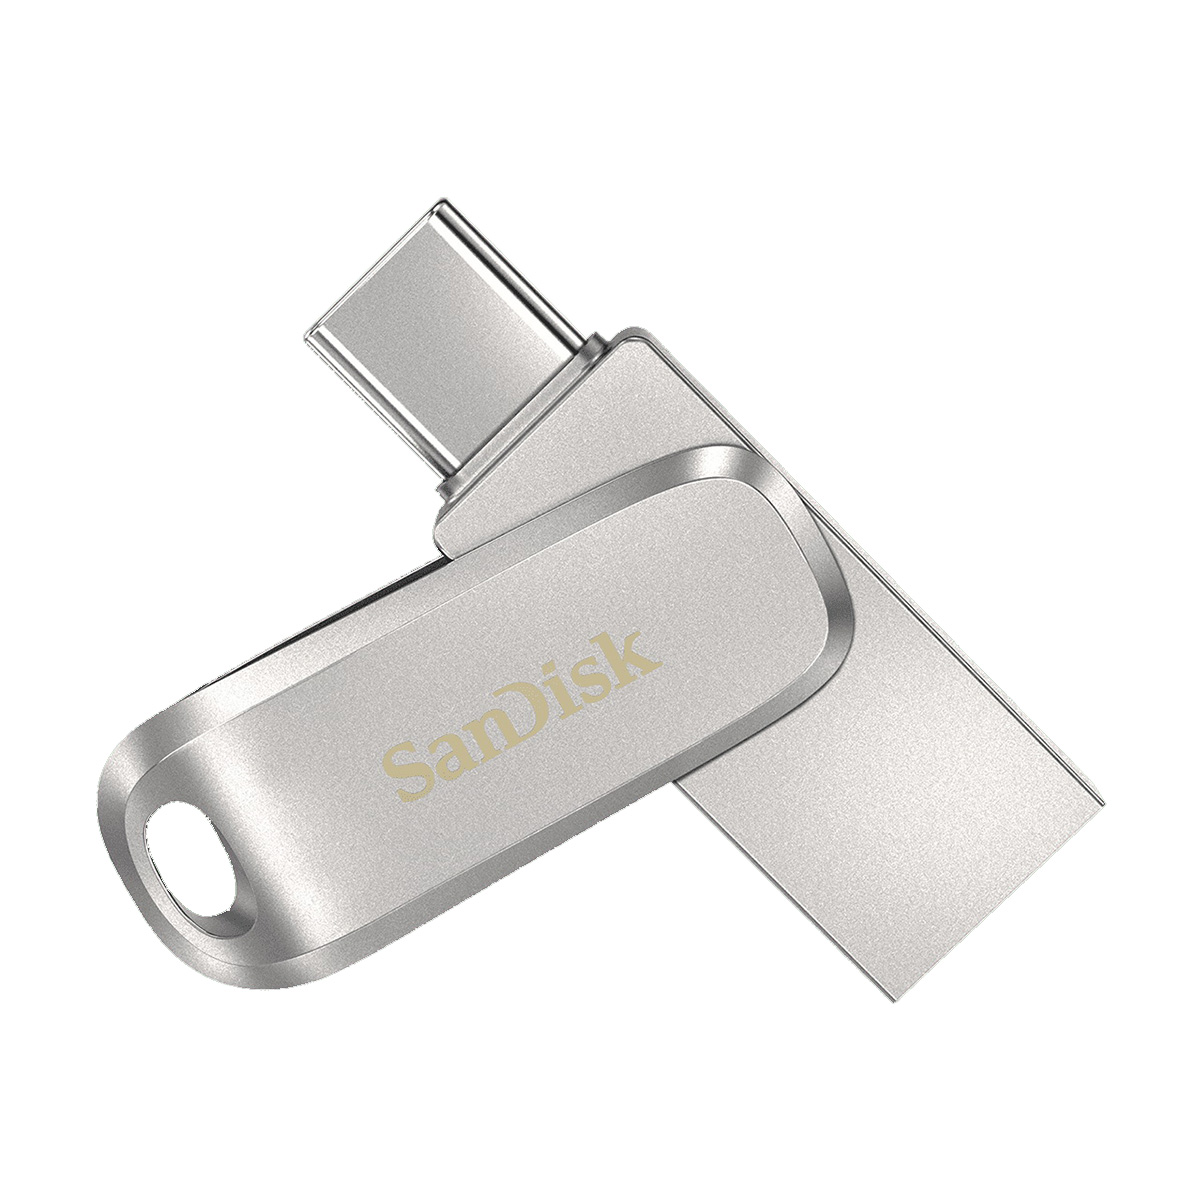 SanDisk Ultra? Dual Drive Luxe Flash Drive